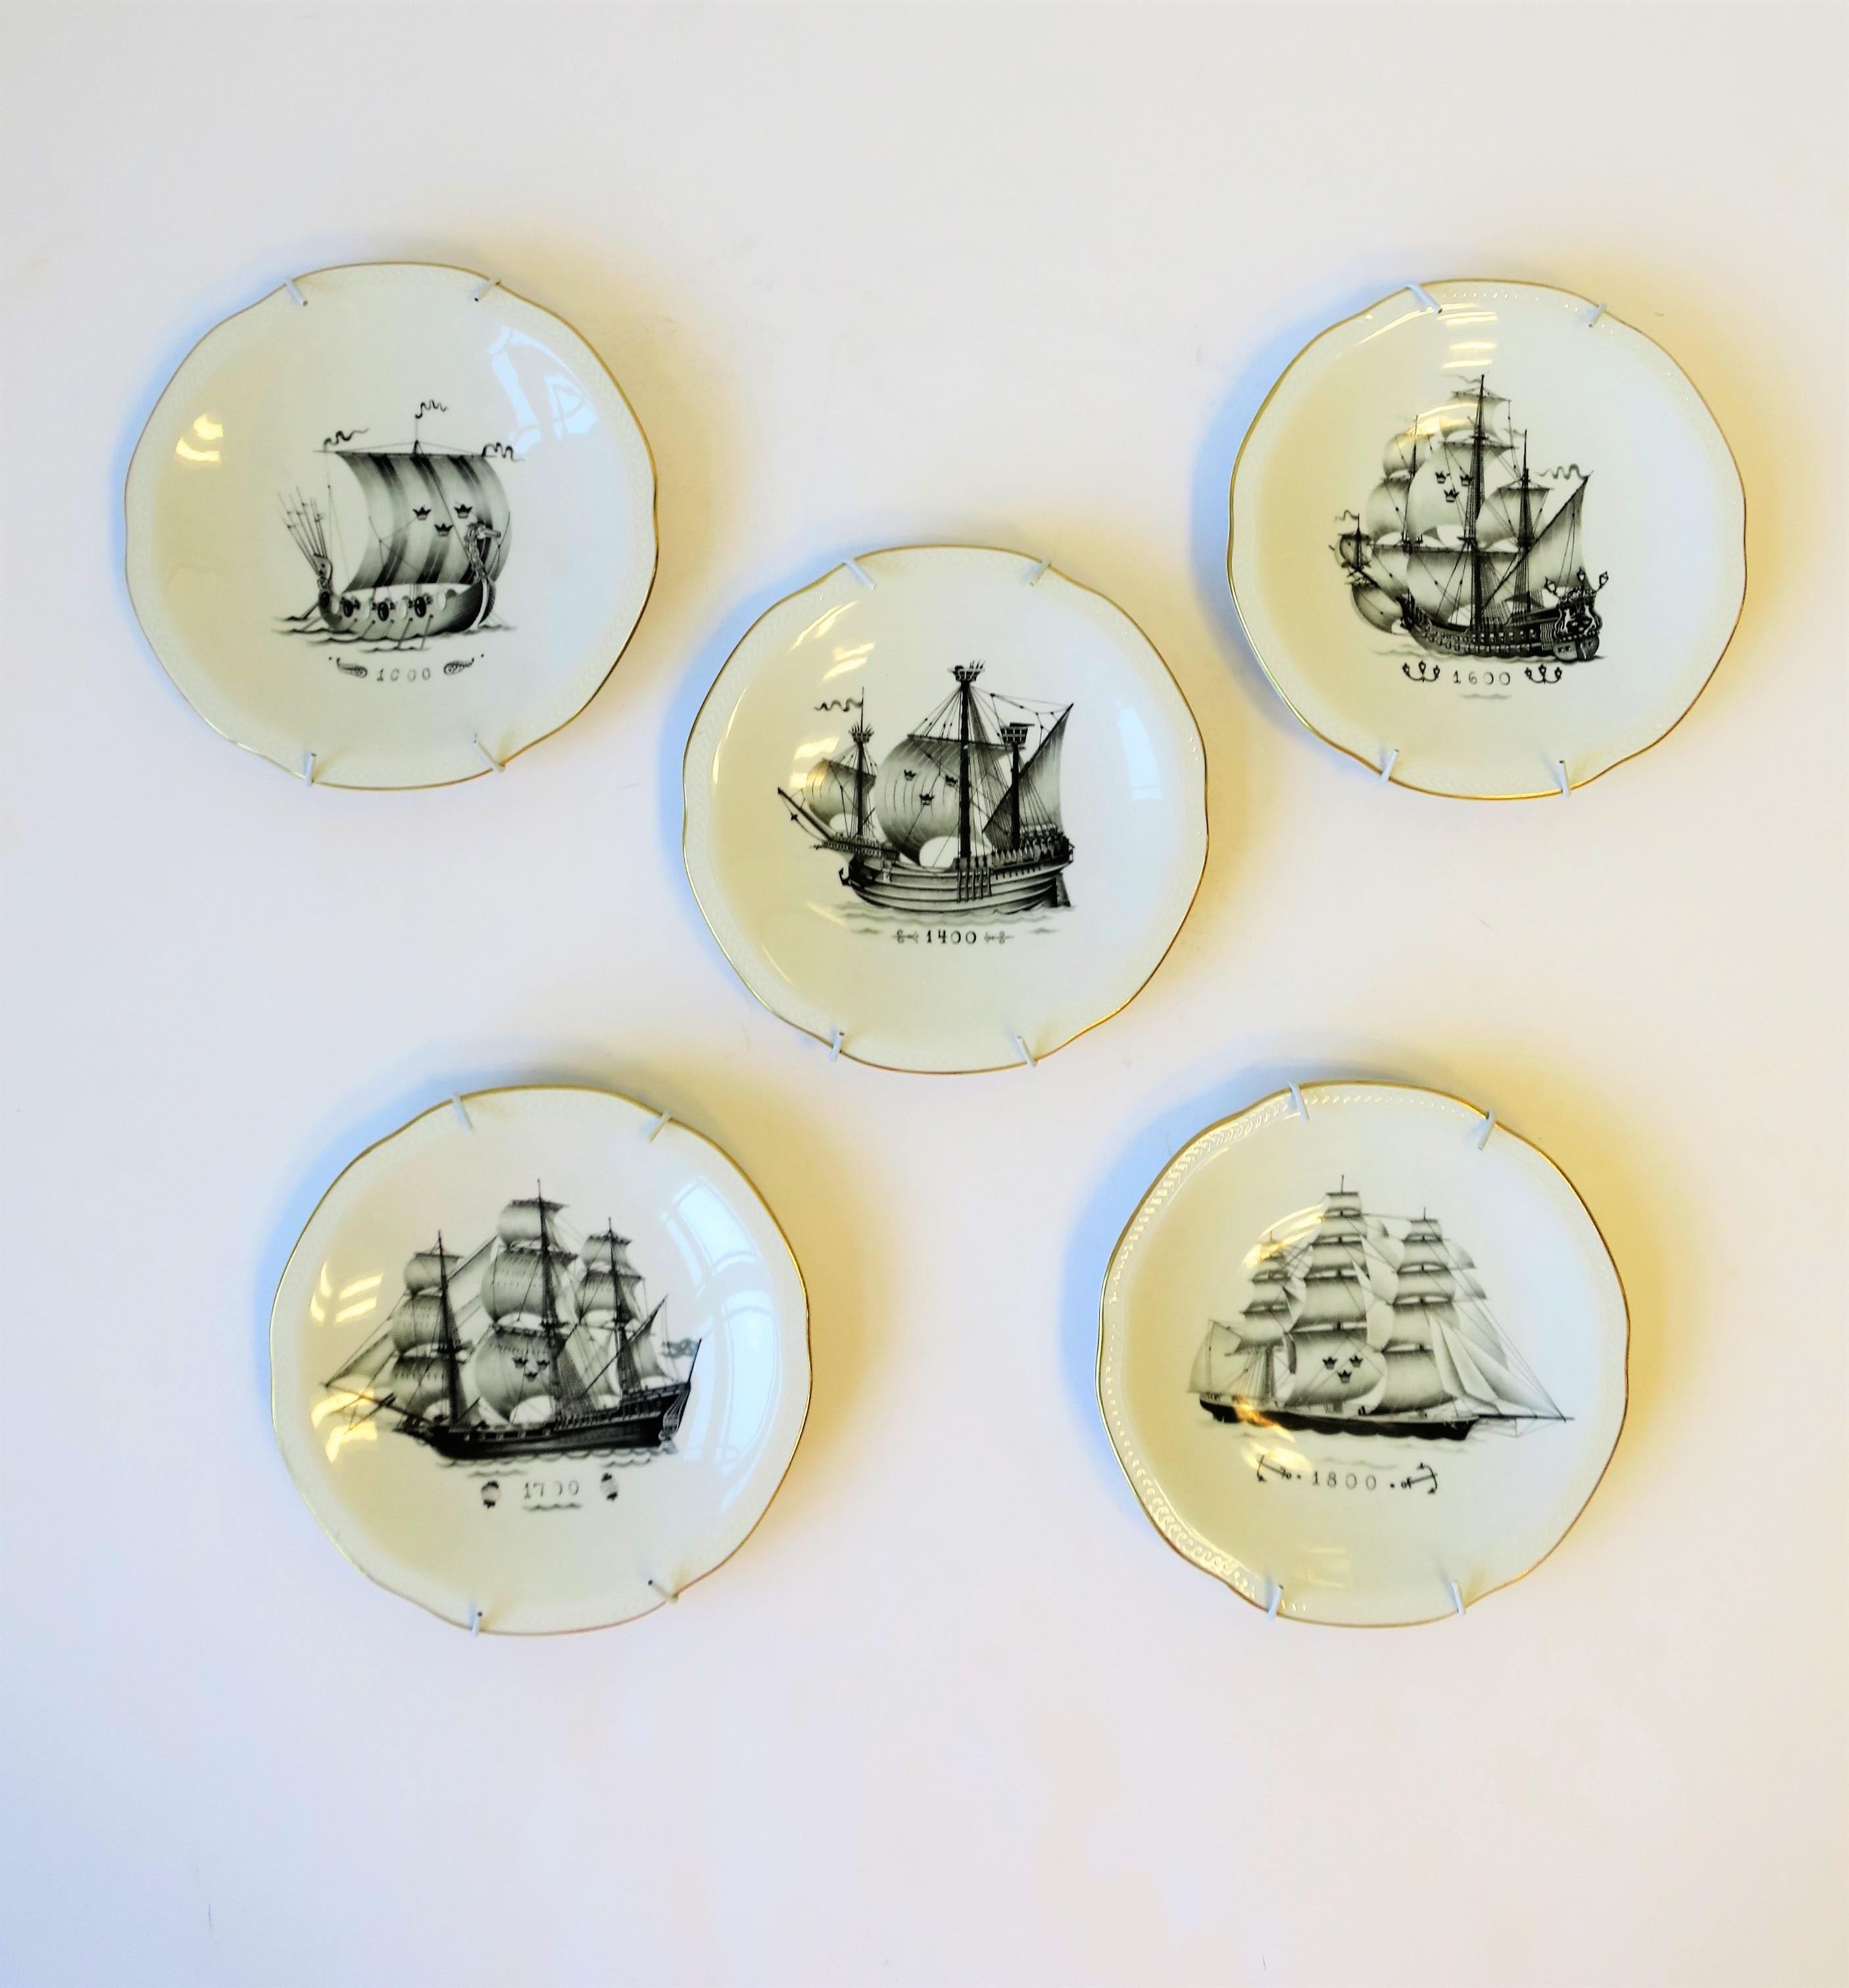 A beautiful set of five (5) Swedish plates by Rörstrand, 20th century, Sweden. Plates are nautical themed with antique sailing ships in black and white. With maker's mark on back as show in images #4 and 5. Plates can be used for cuisine or as wall